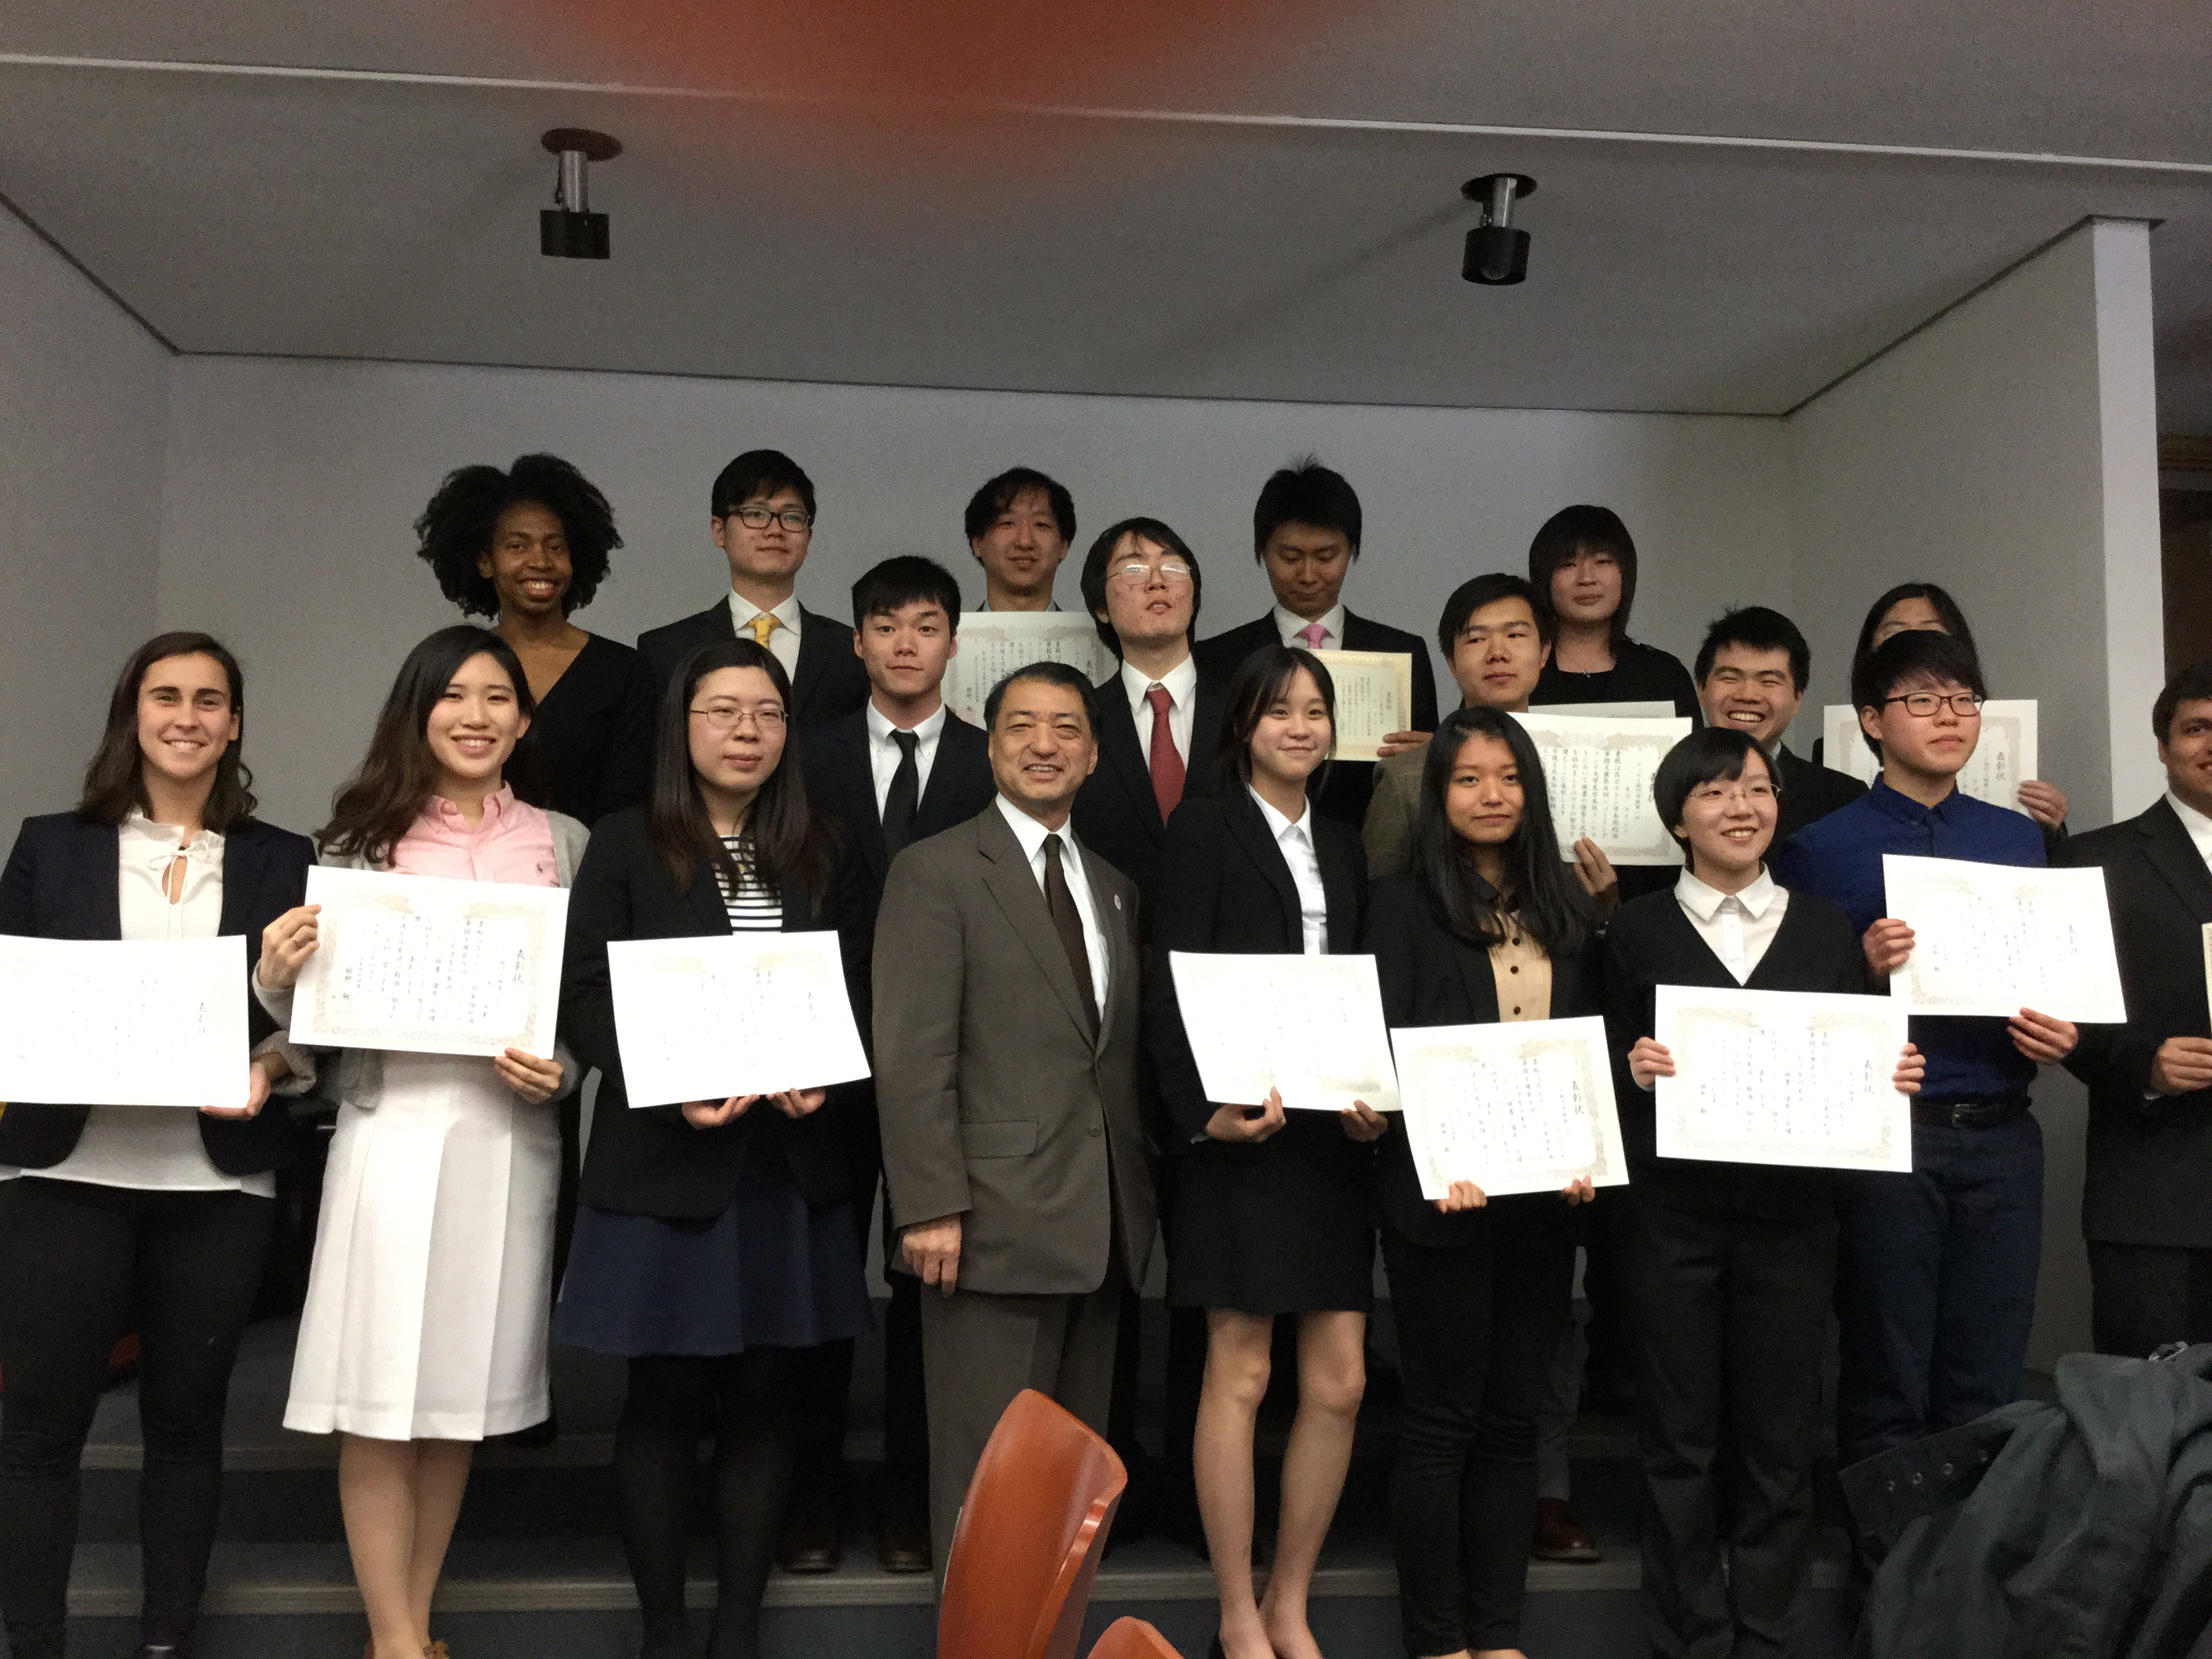 Consulate General of Japan Annual Japanese Language Contest